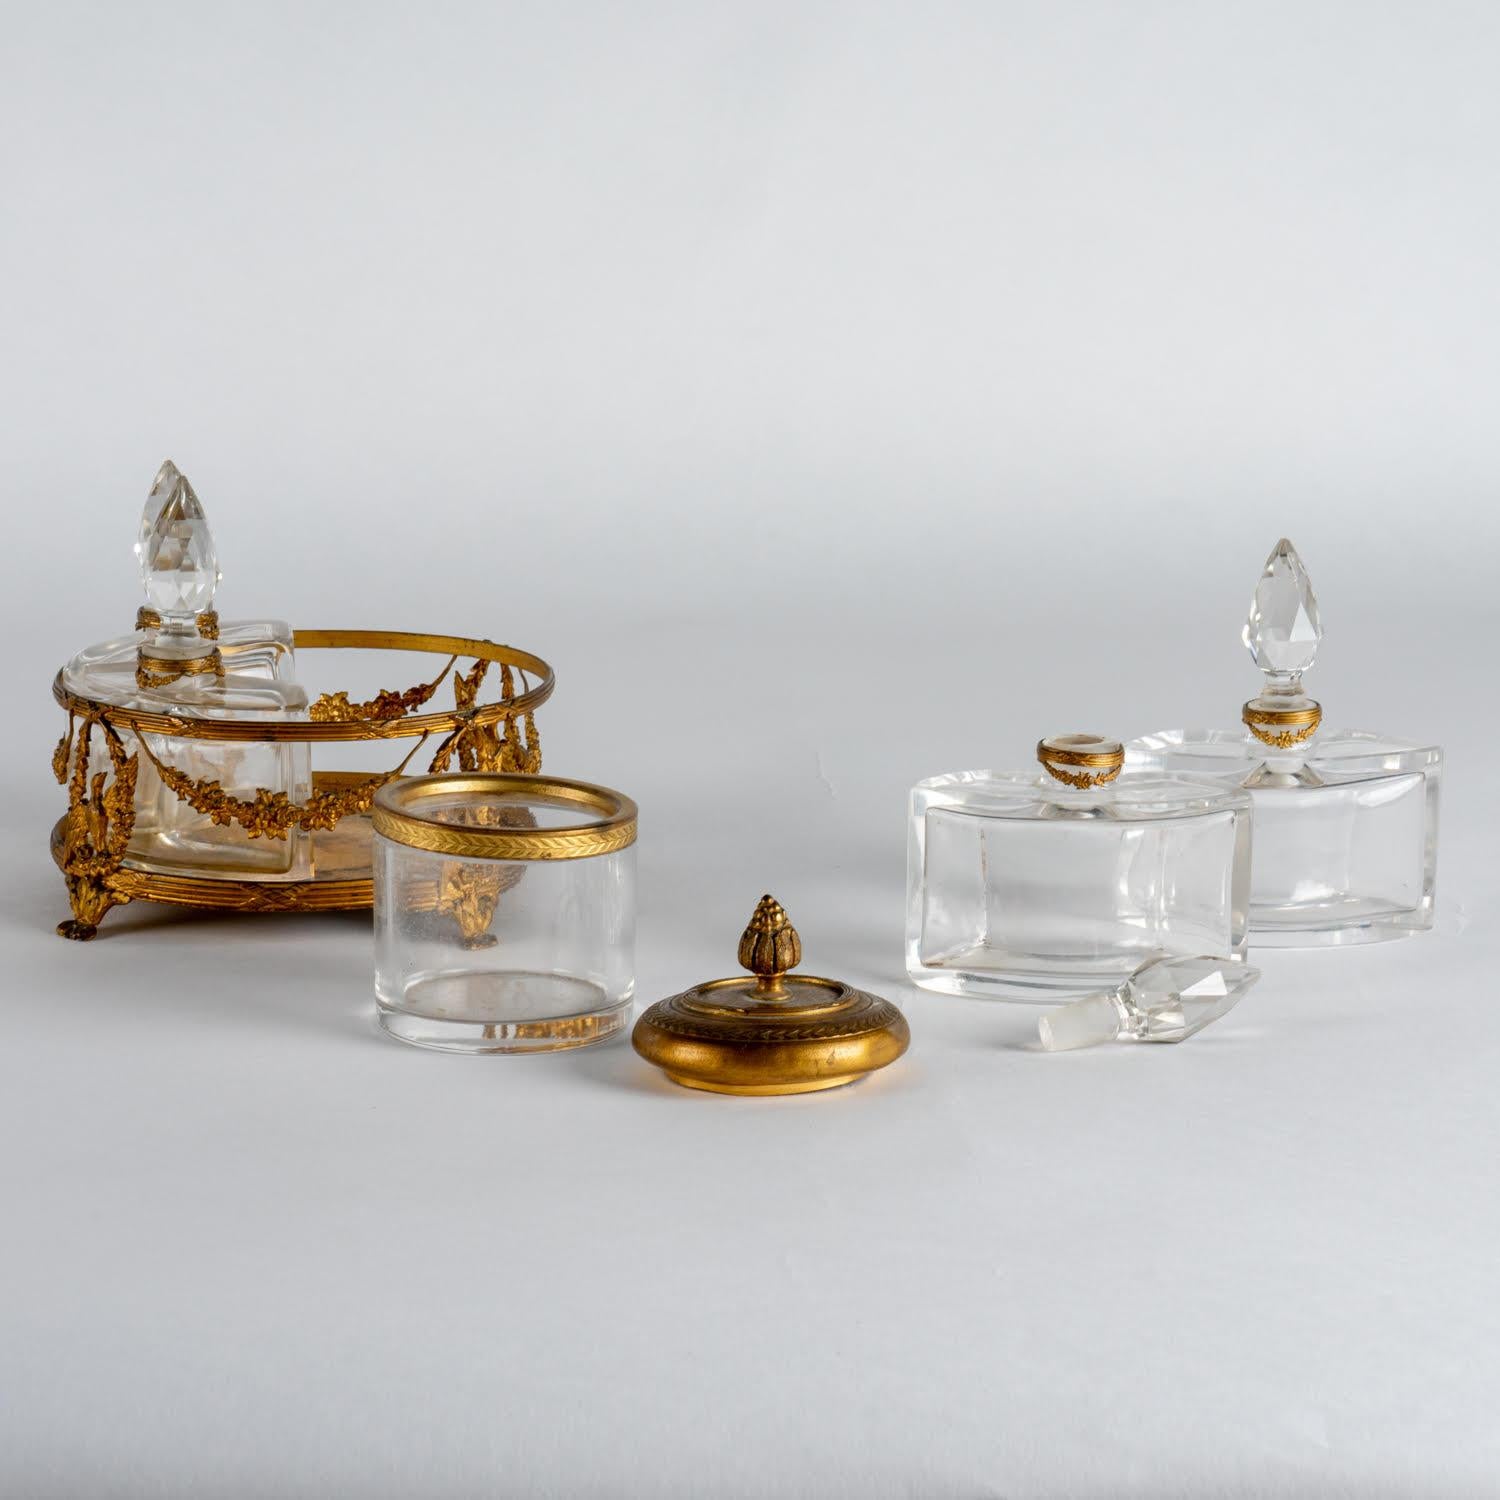 Make-up set composed of a Poudrier and 4 Flacons, XIXth Century.

Make-up set in gilded brass and crystal from the Napoleon III period, 19th century.   
Photos:(c)inu.studio_art 
h: 11cm , D: 13cm